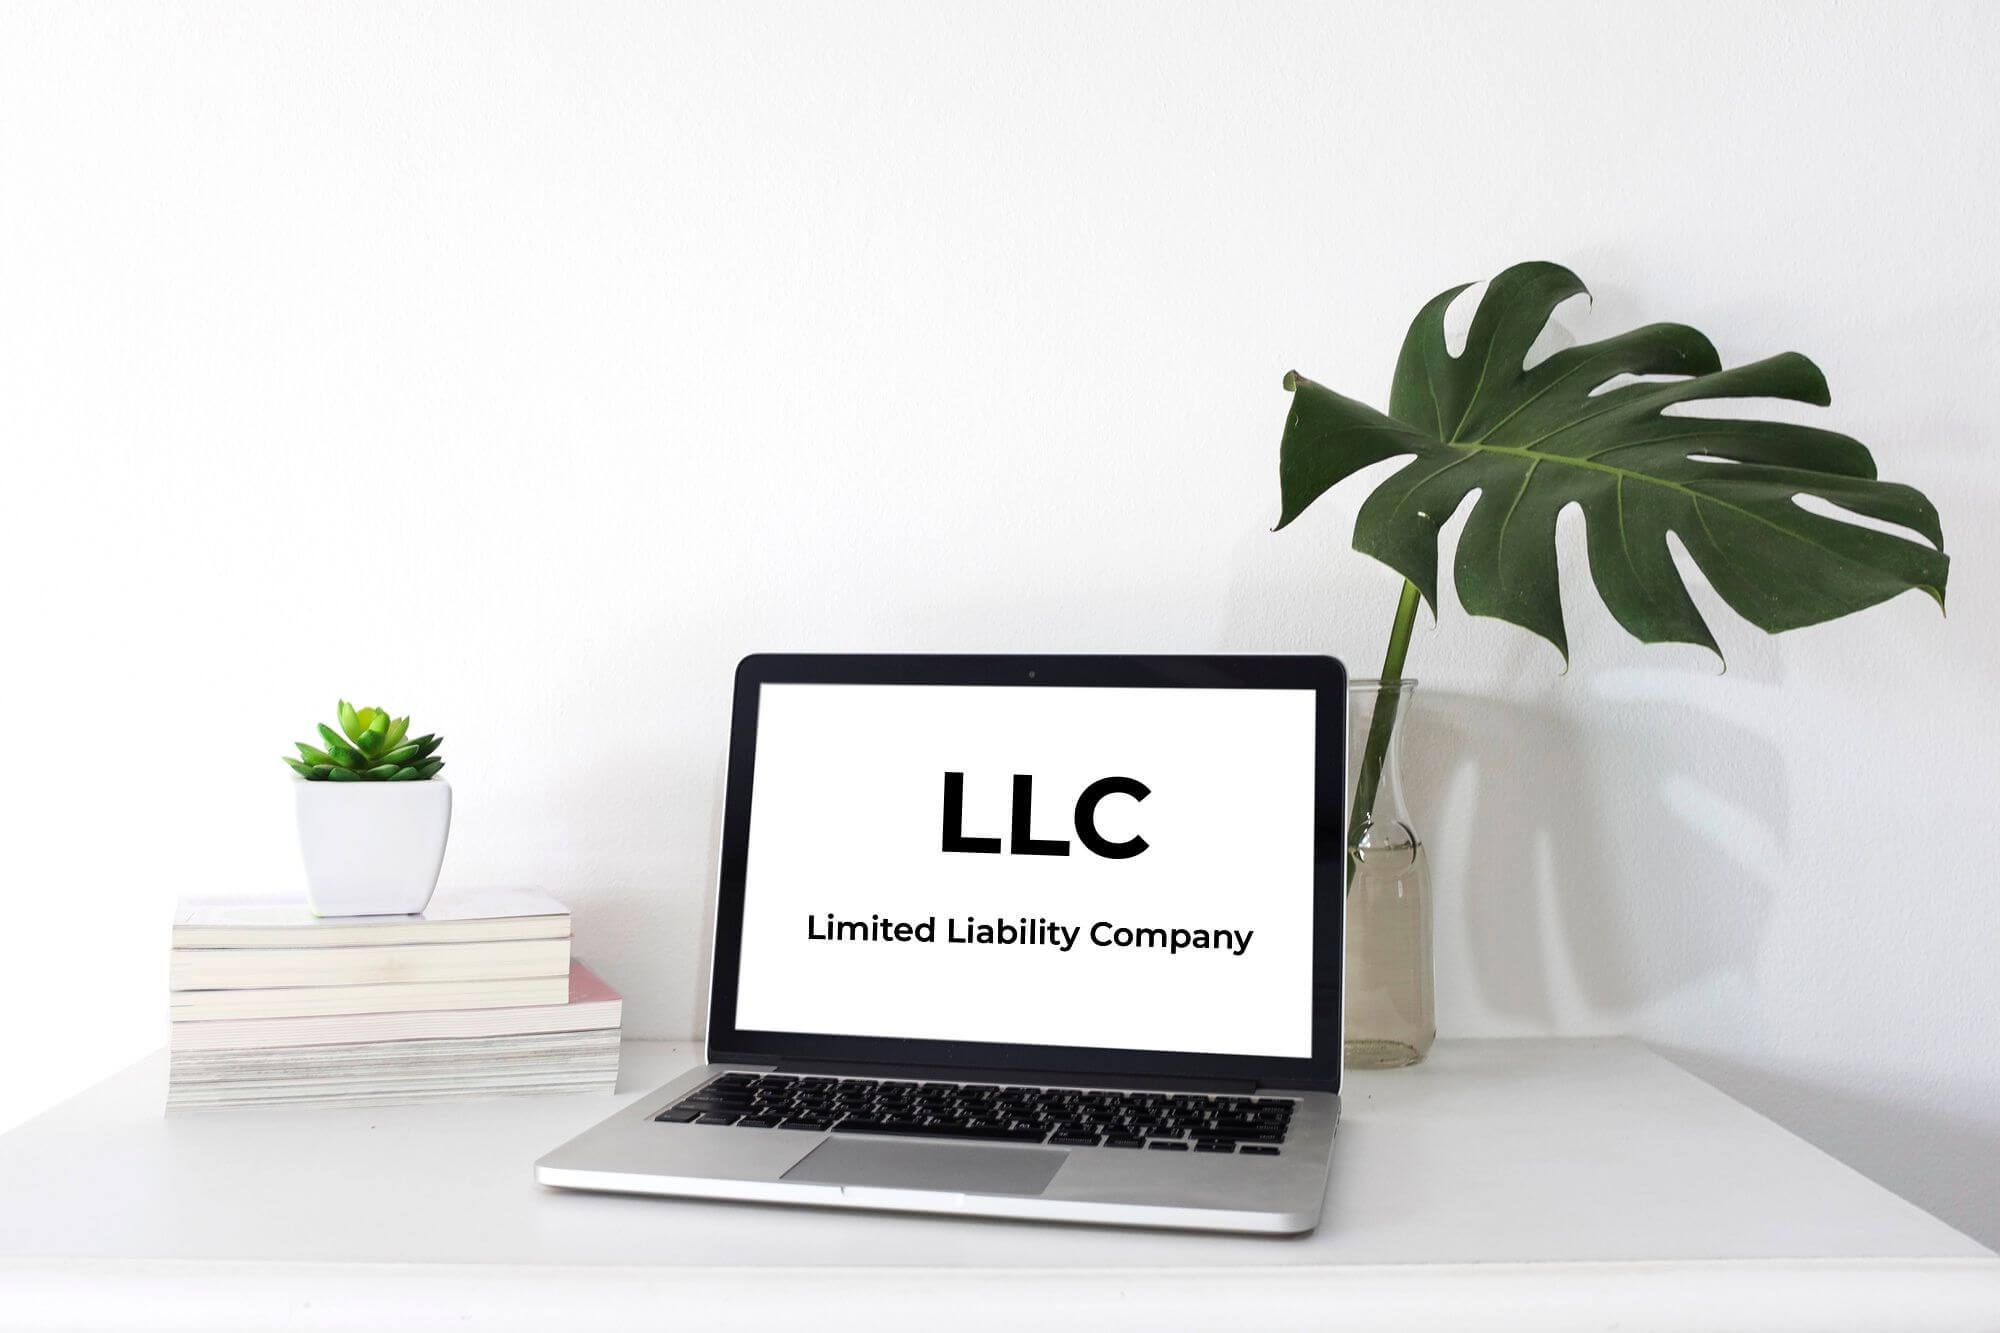 How To Start an LLC in 9 Steps - 2023